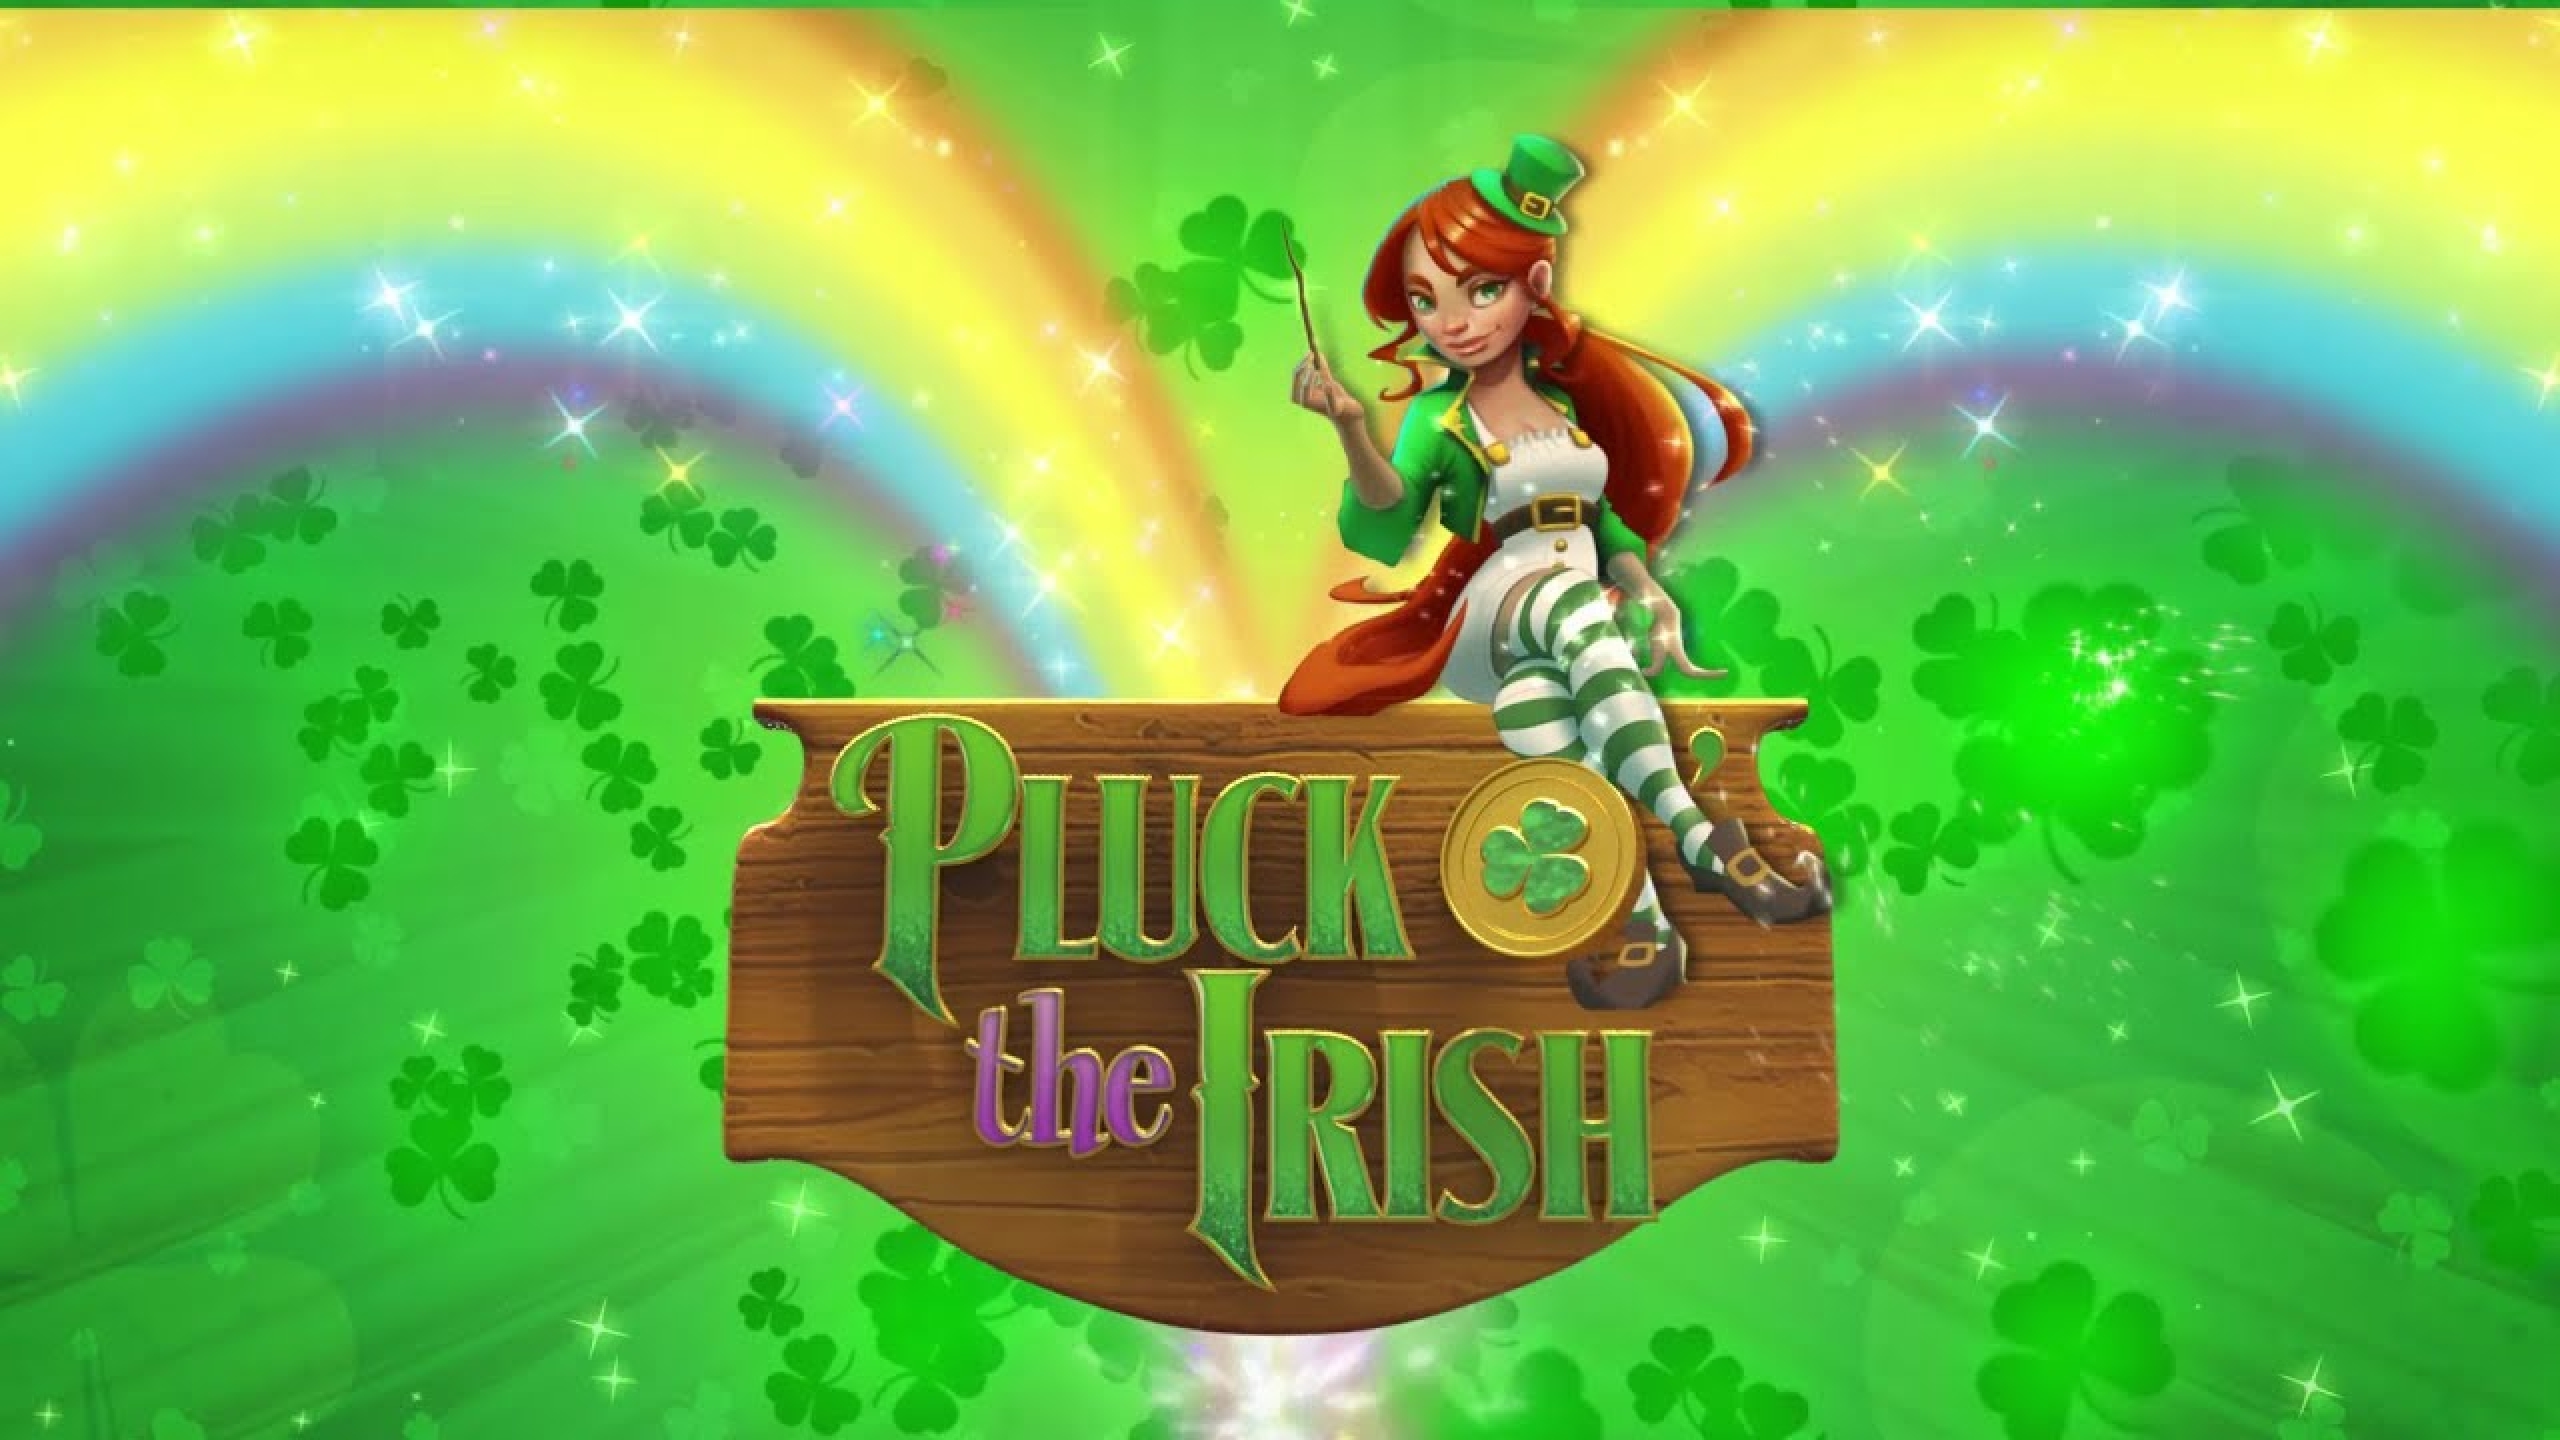 The Pluck O' the irish Online Slot Demo Game by High 5 Games